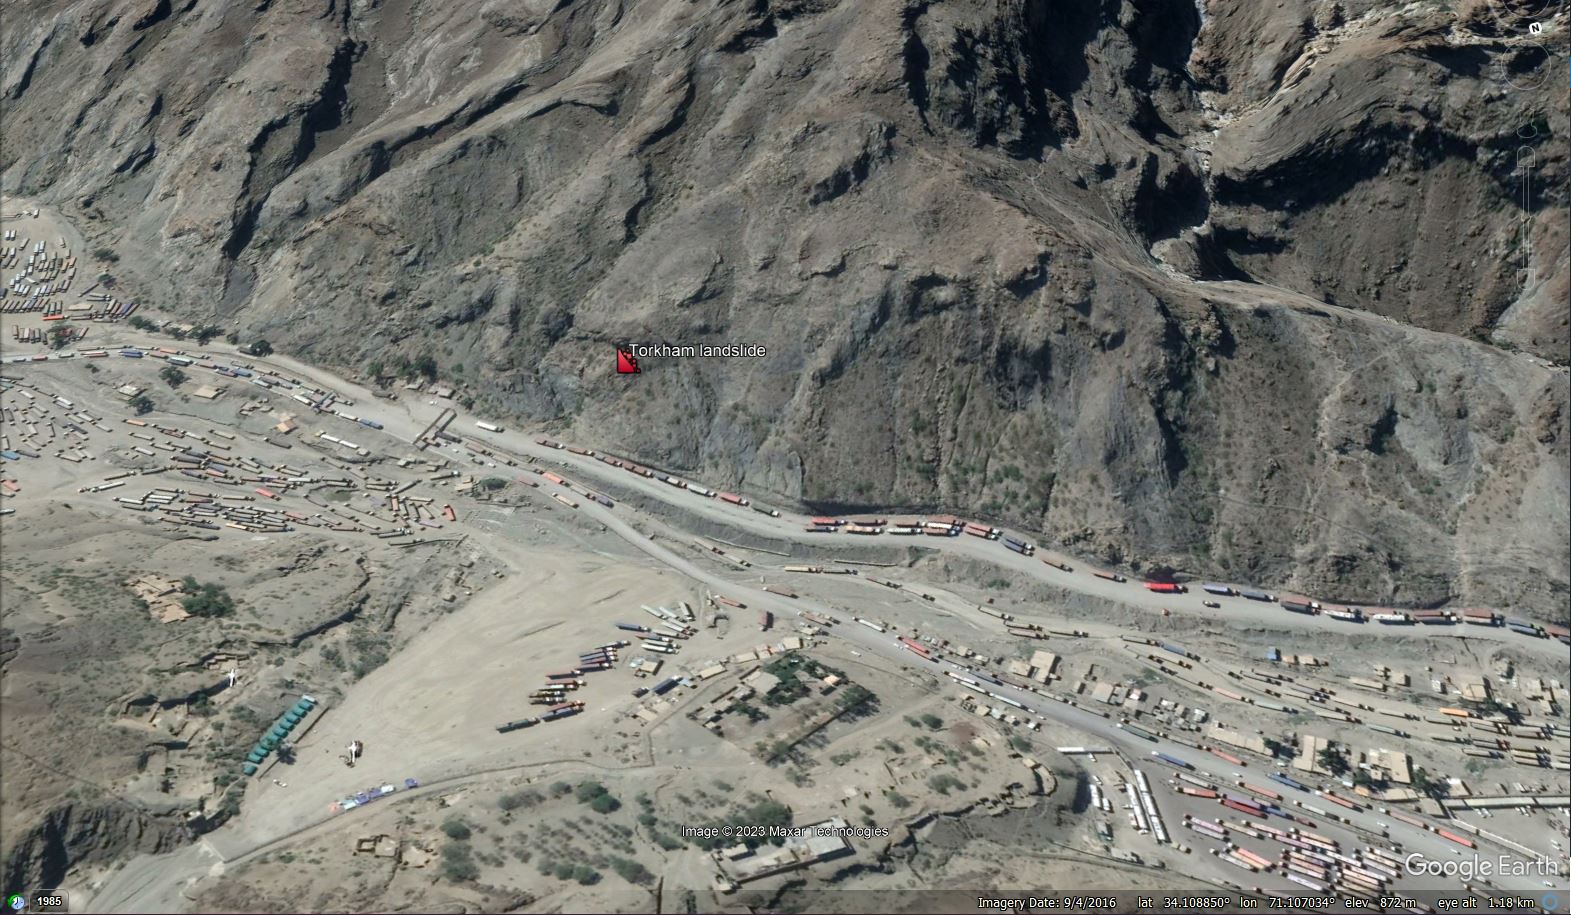 Archive (2016) Google Earth view of the site of the 18 April 2023 landslide at Torkham in Pakistan.